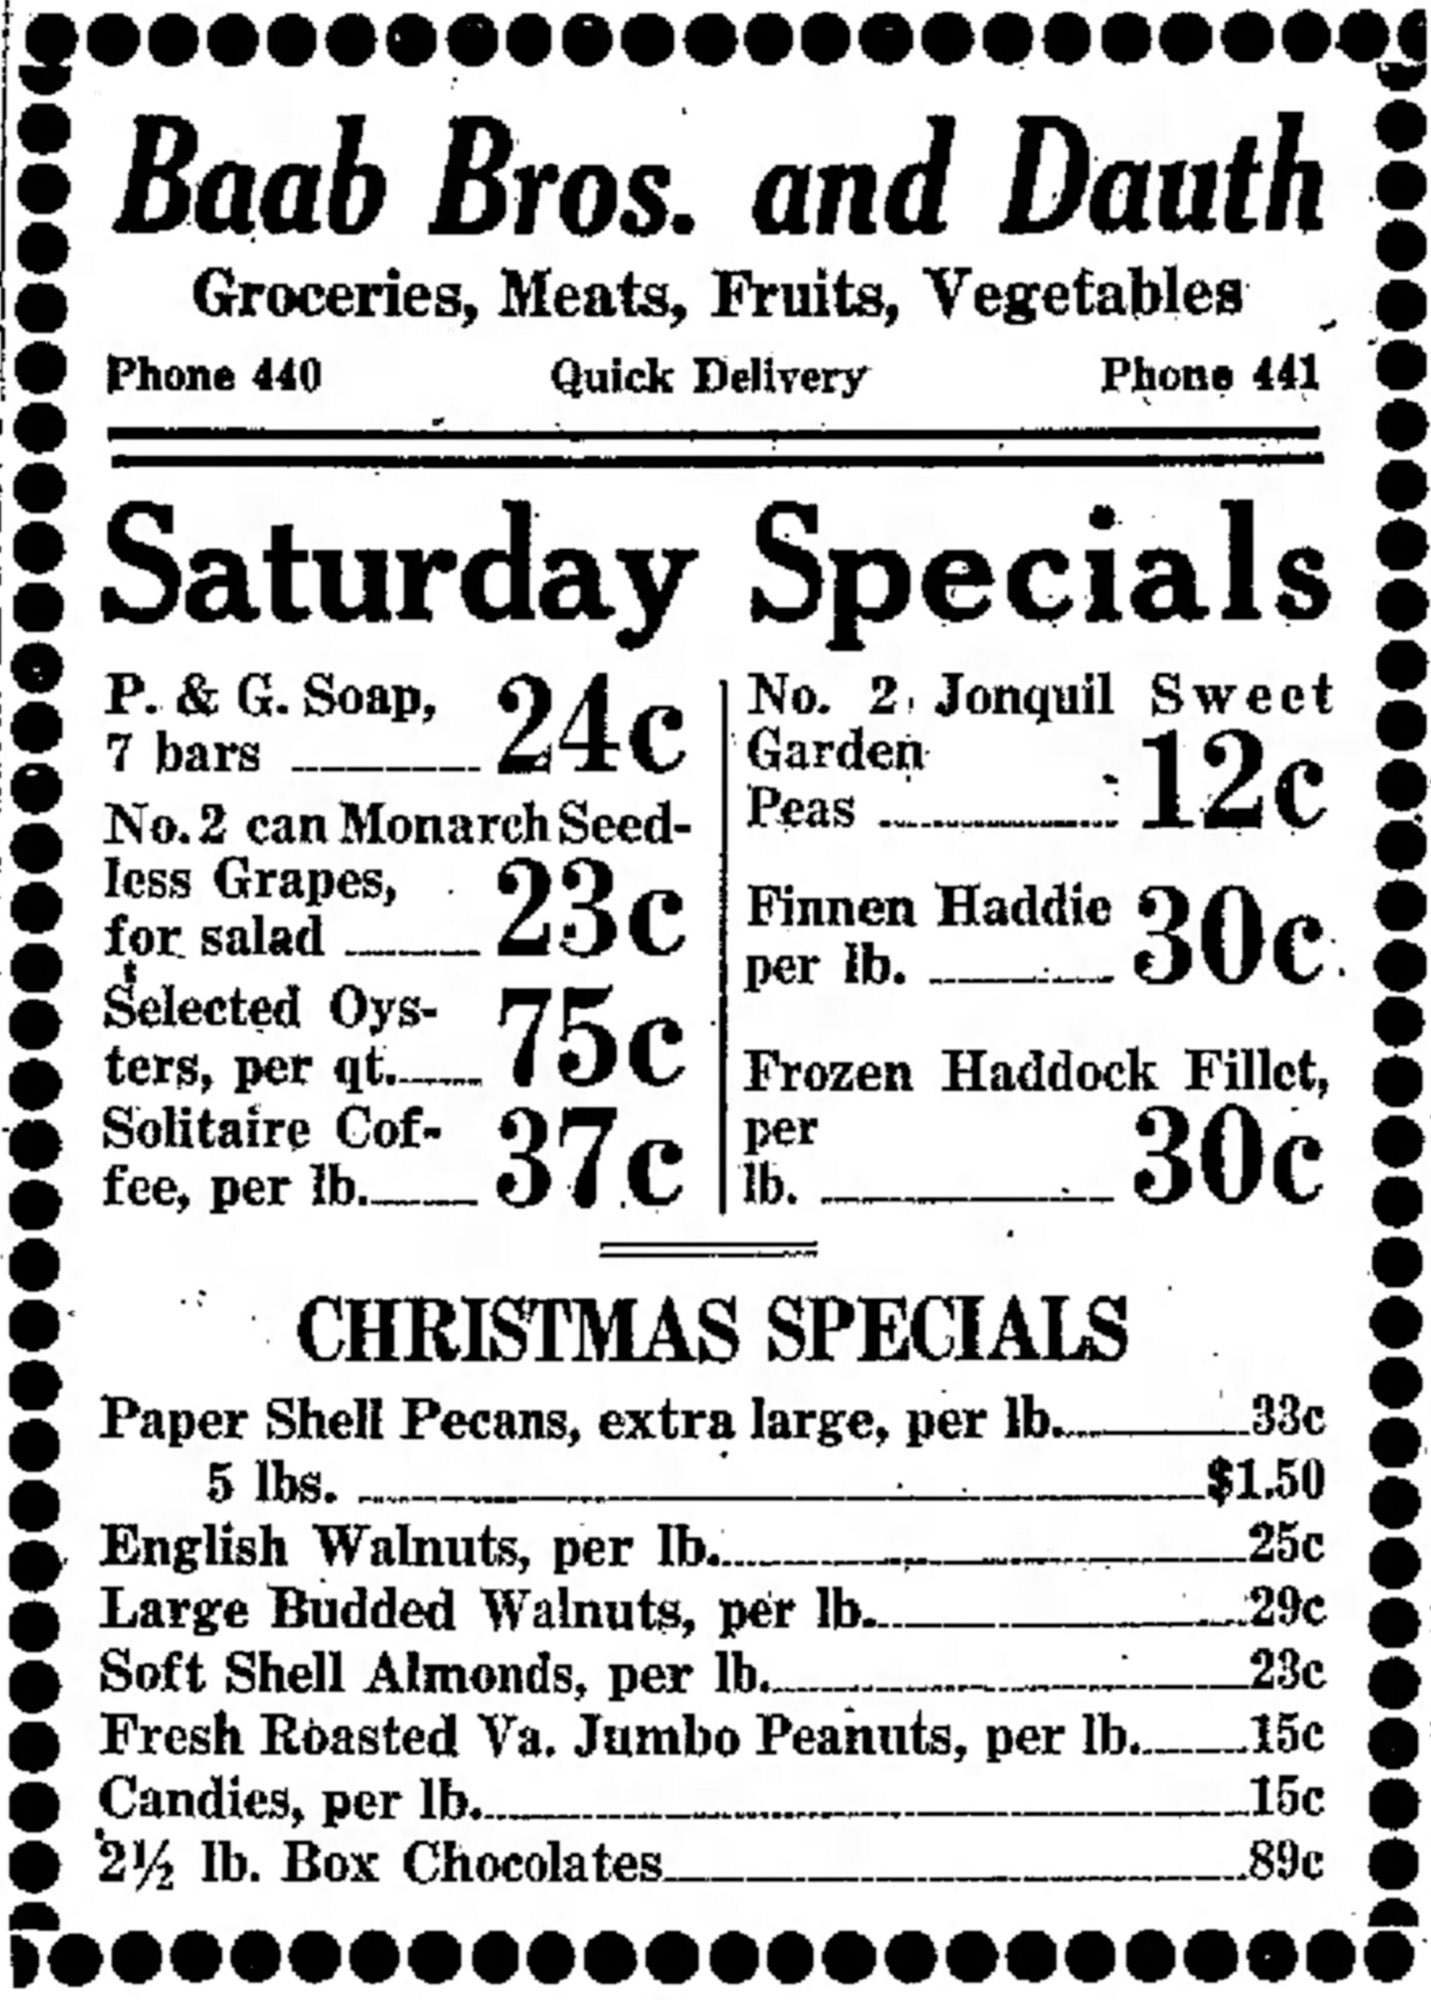 Dauth Family Archive - 1931-12-18 - Greeley Daily Tribune - Baab Bros and Dauth Advertisement